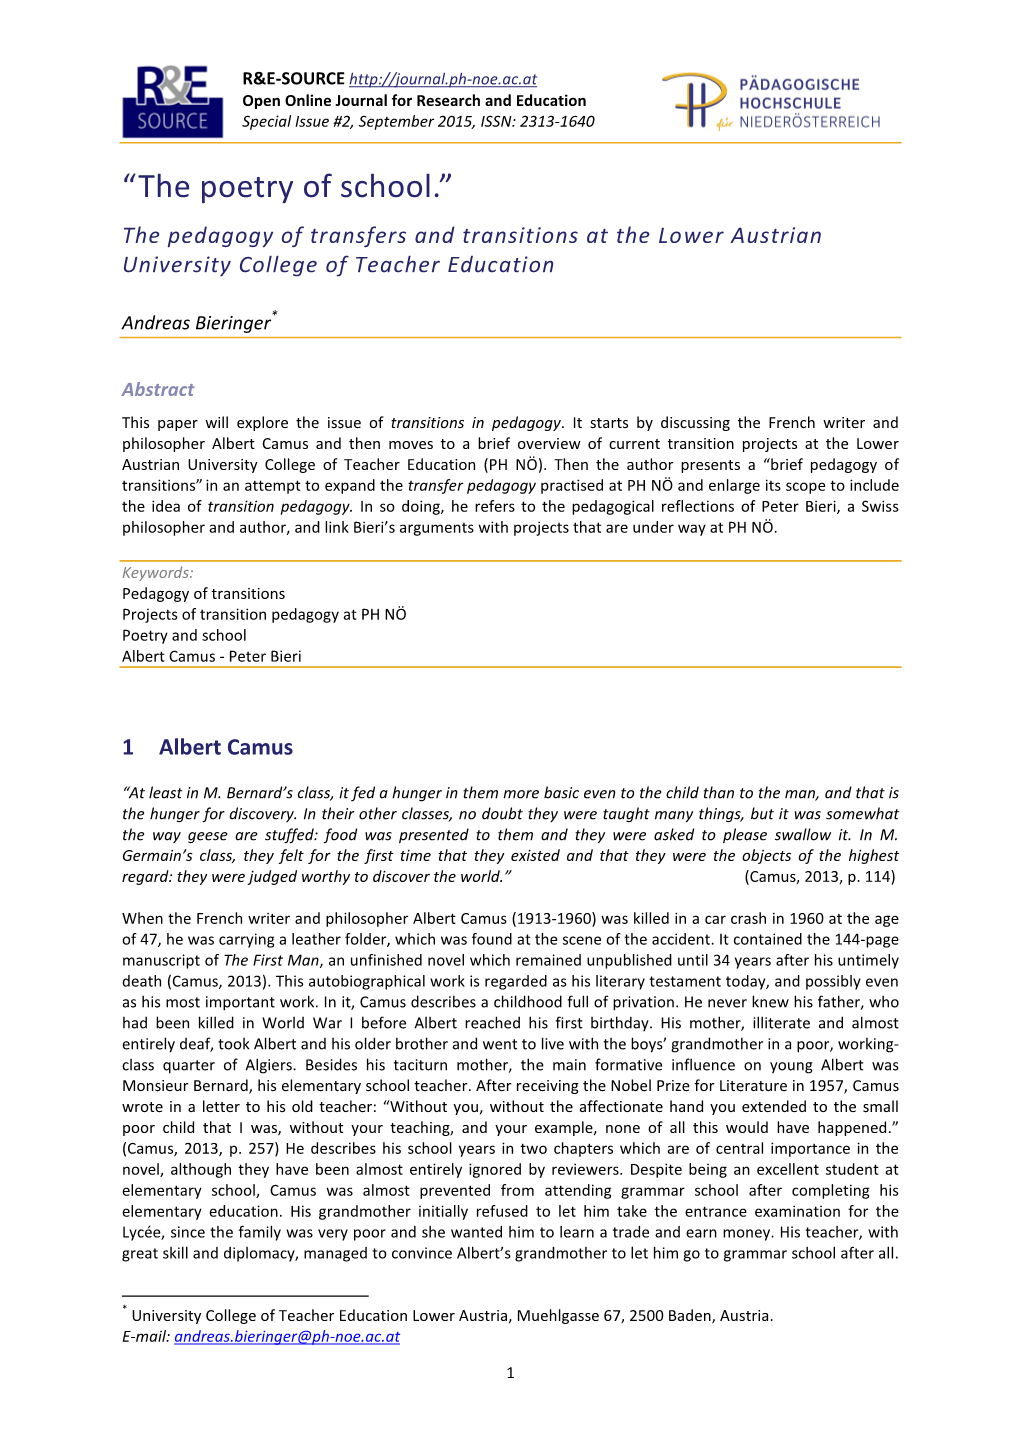 “The Poetry of School.” the Pedagogy of Transfers and Transitions at the Lower Austrian University College of Teacher Education